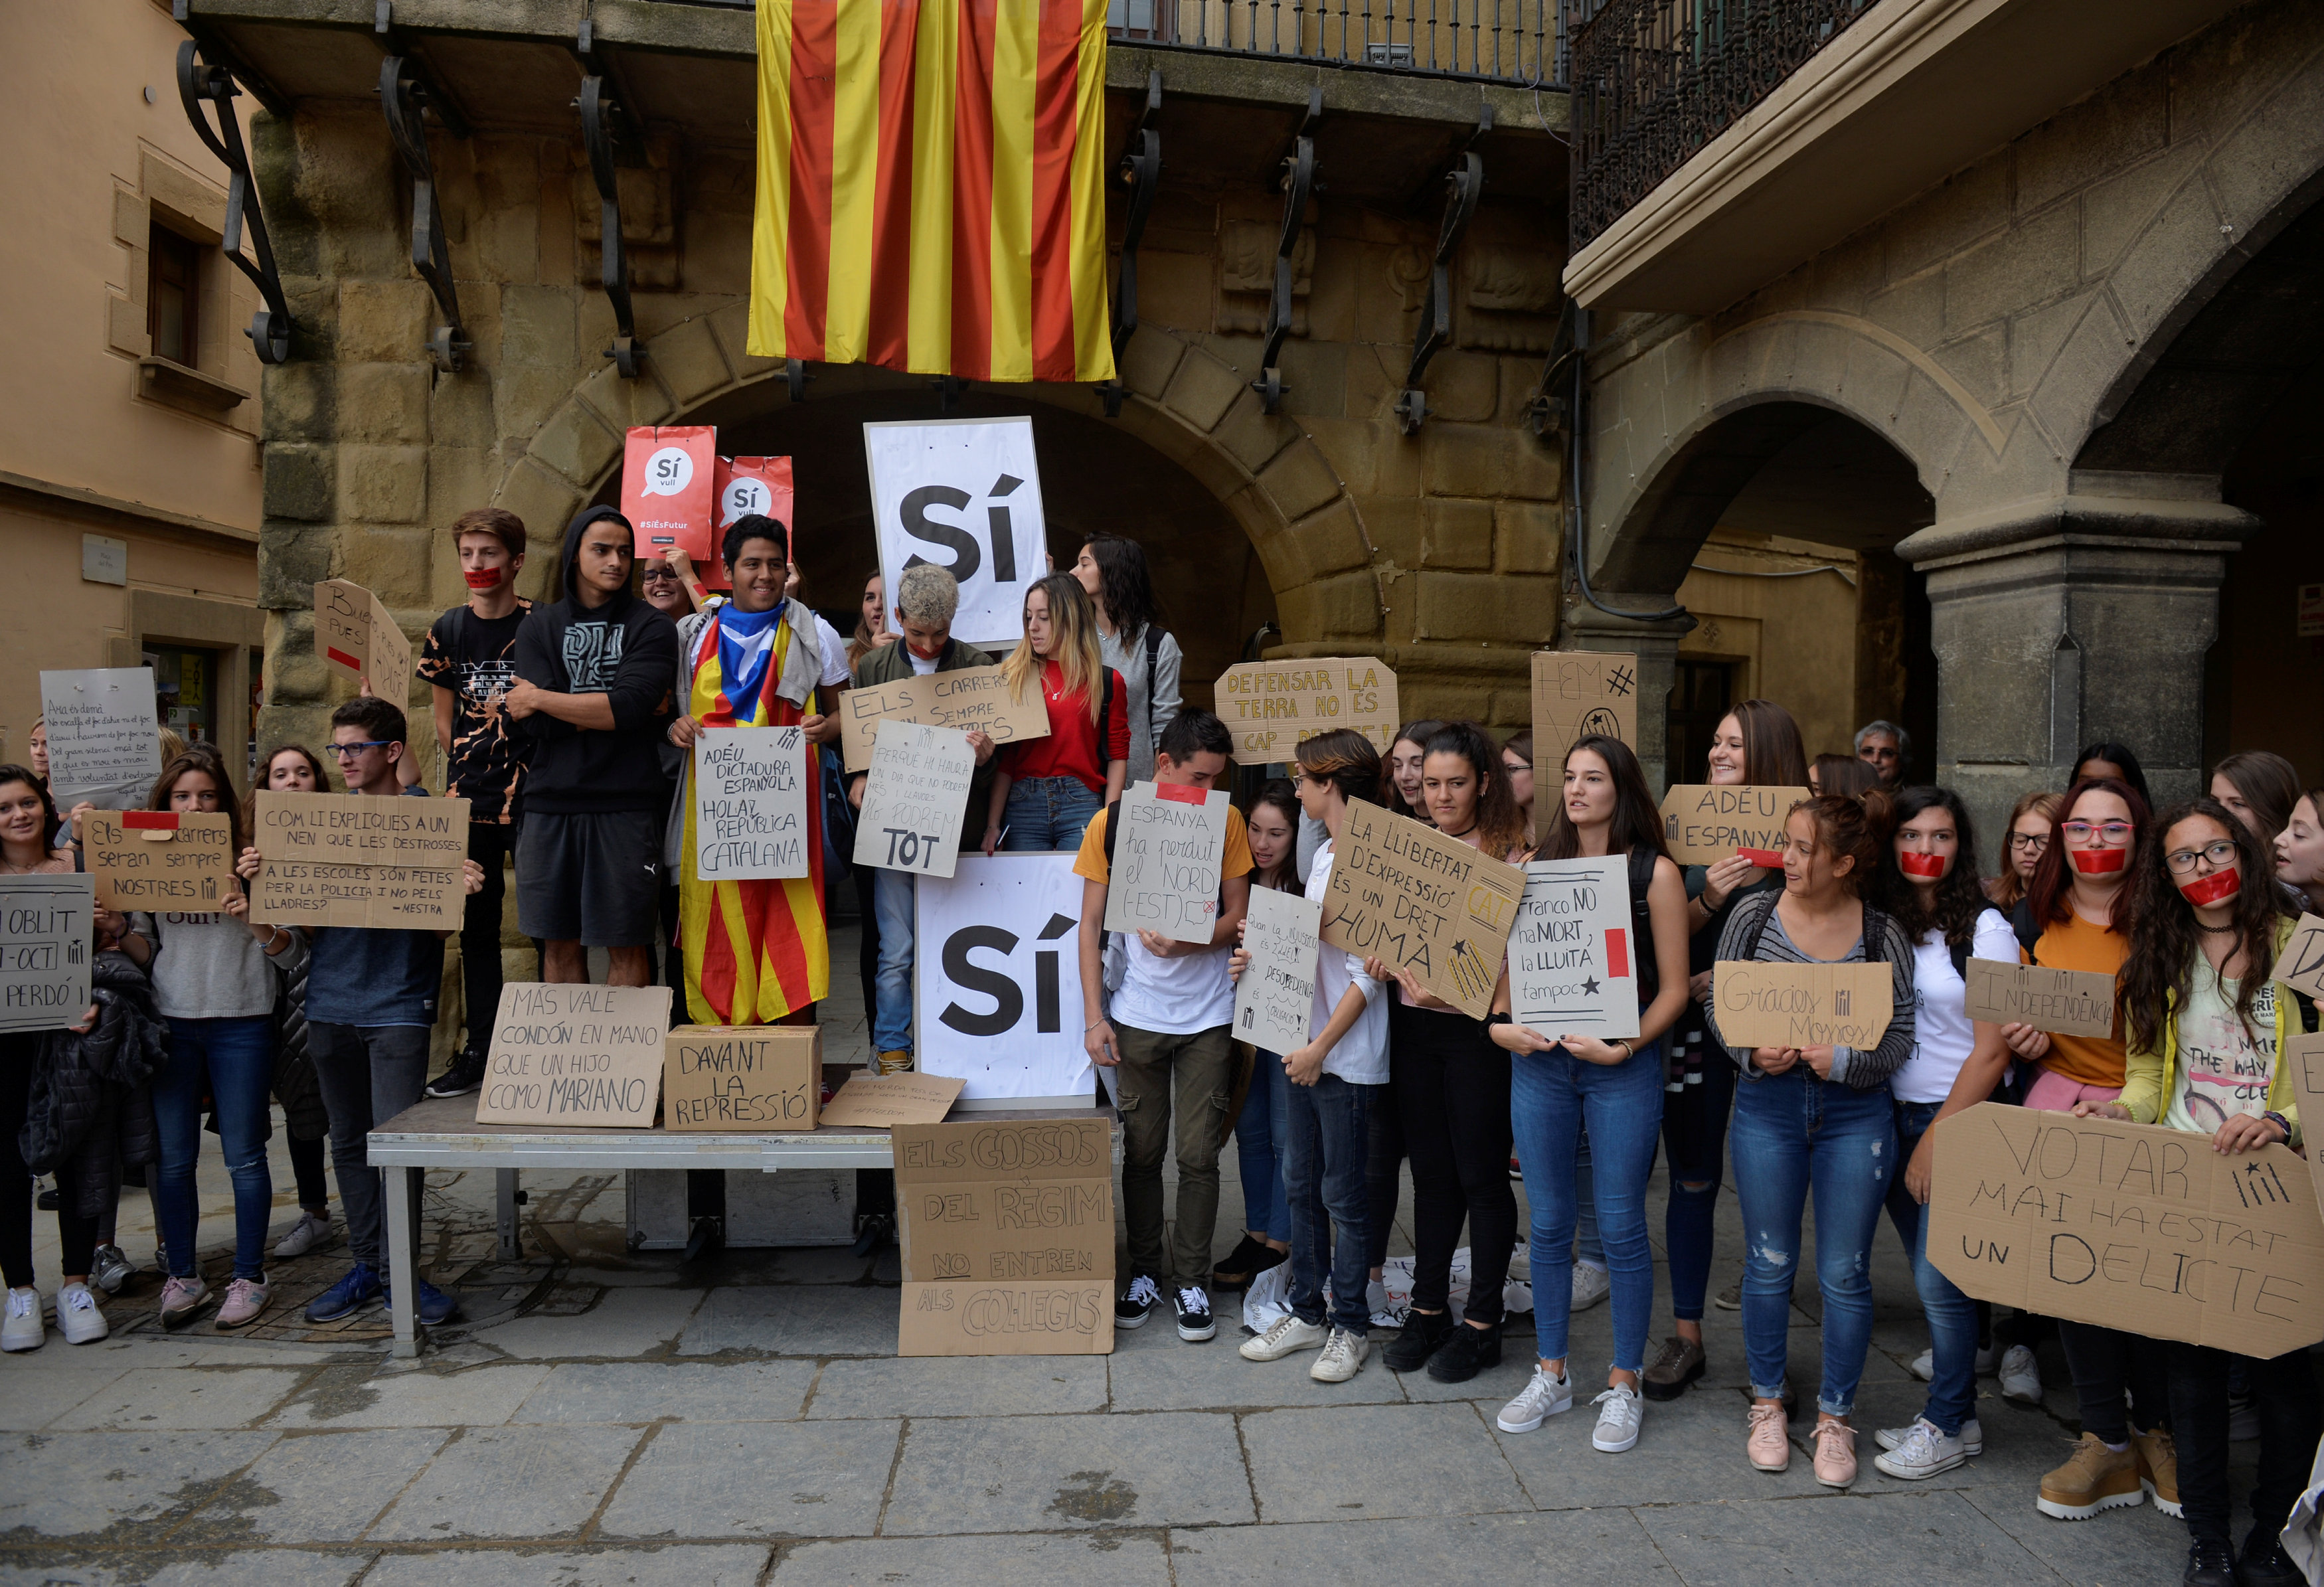 Students attend a protest called by pro-independence groups for citizens to gather at noon in front of city halls throughout Catalonia, in the Plaza Mayor of Vic